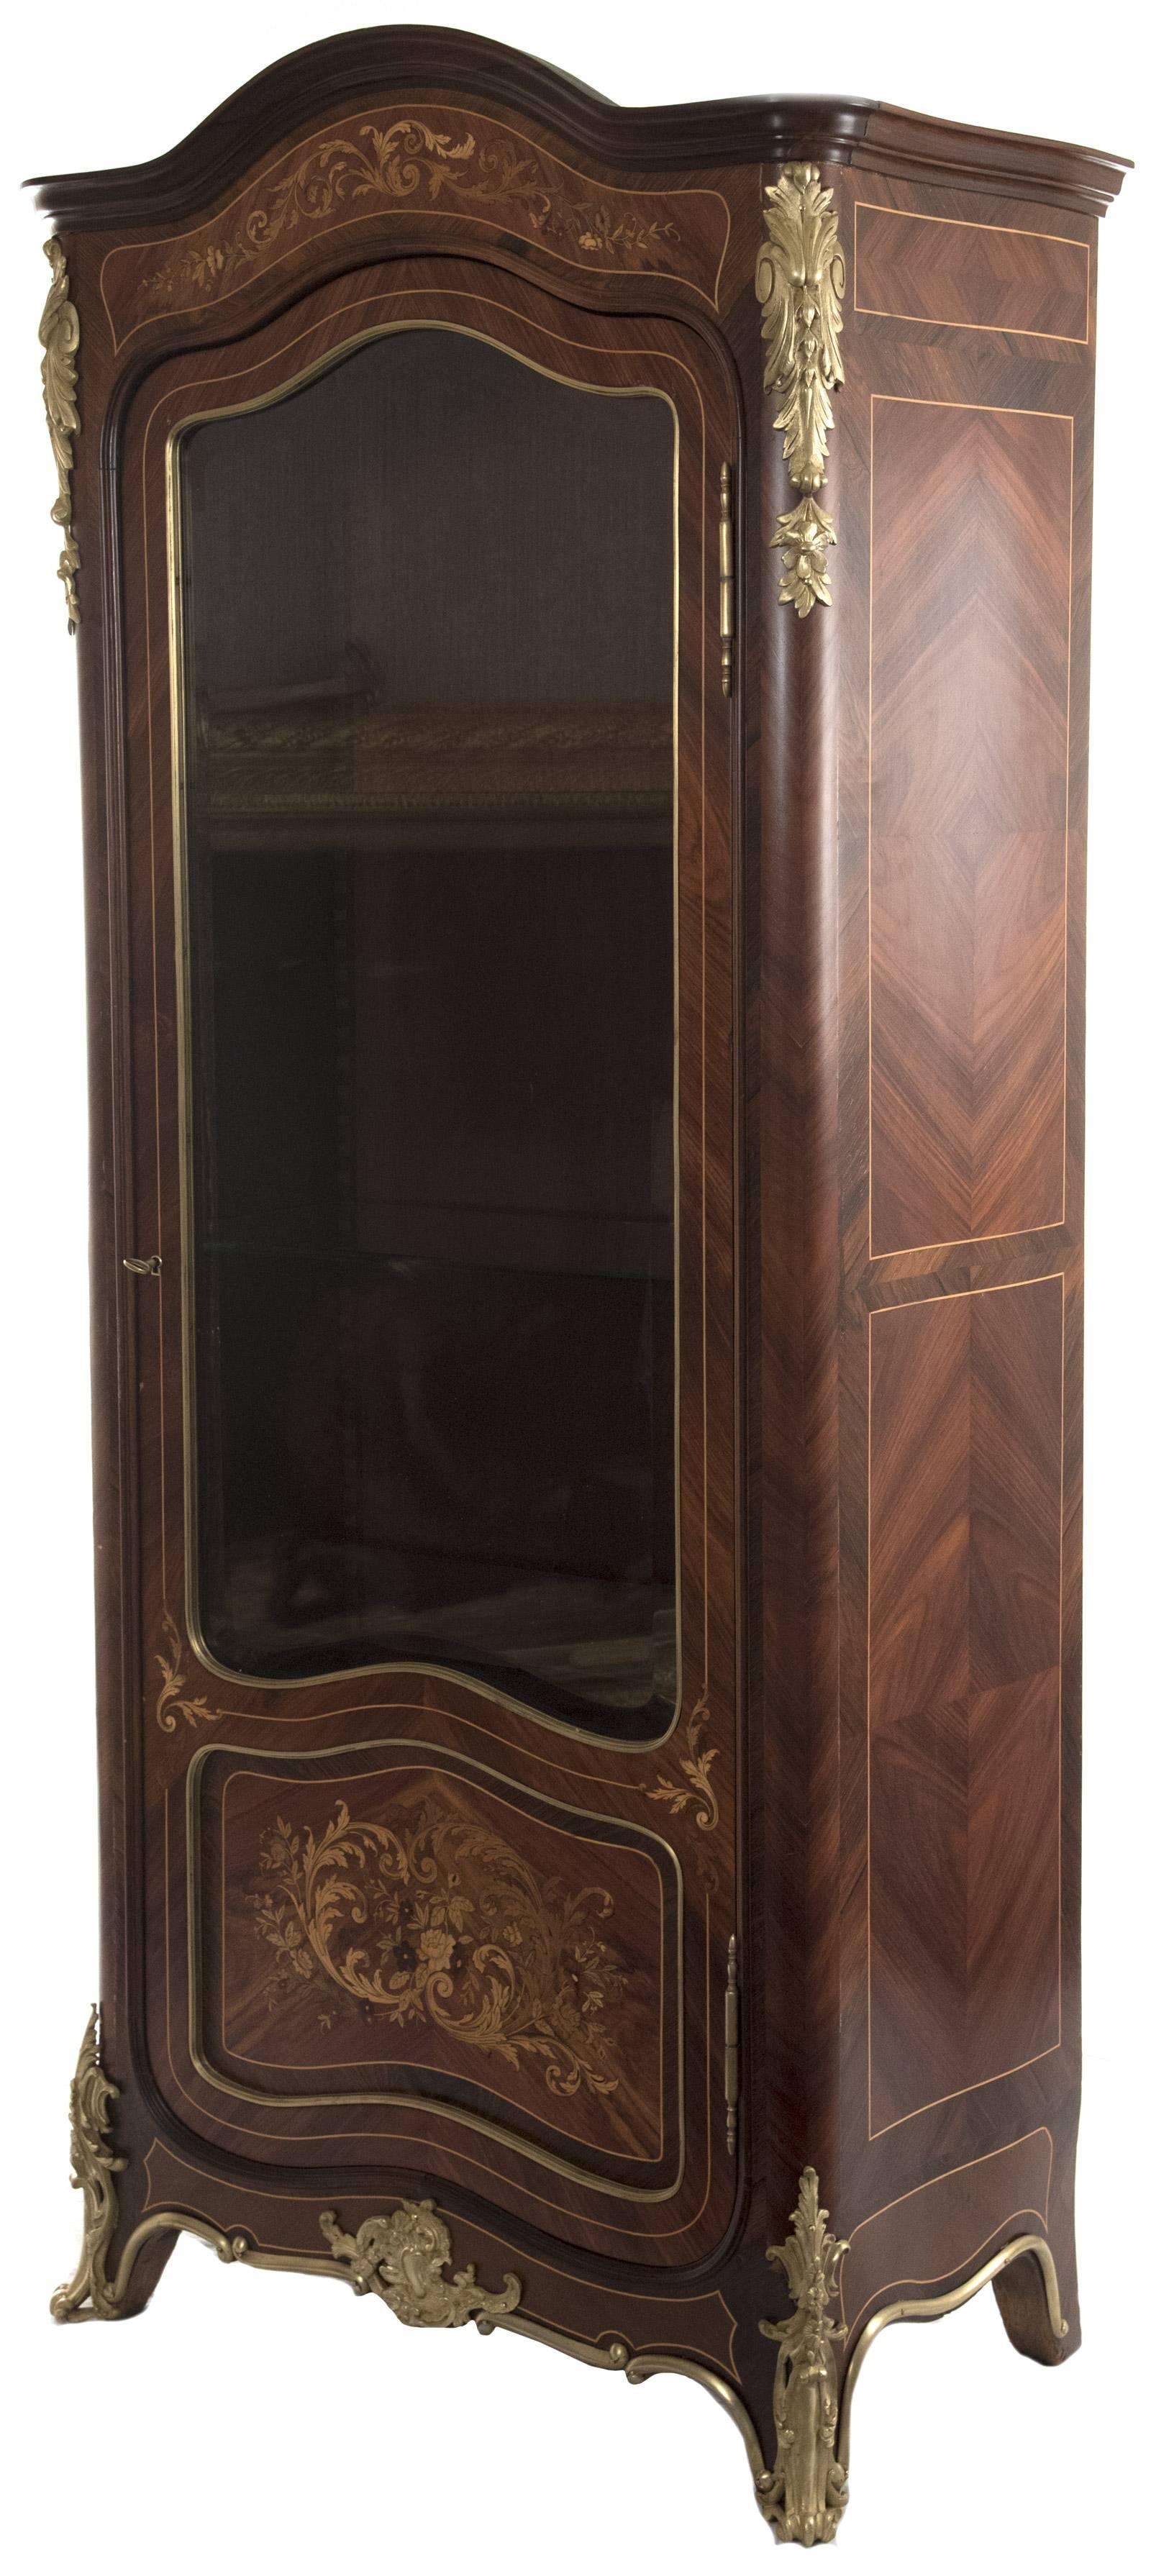 A French Louis XV style vitrine (Napoleon III) covered in figured veneer panels with inlaid details in contrasting woods. Below the rounded pediment is an inlaid panel of conforming shape with a delicately scrolling foliate motif, above a glazed